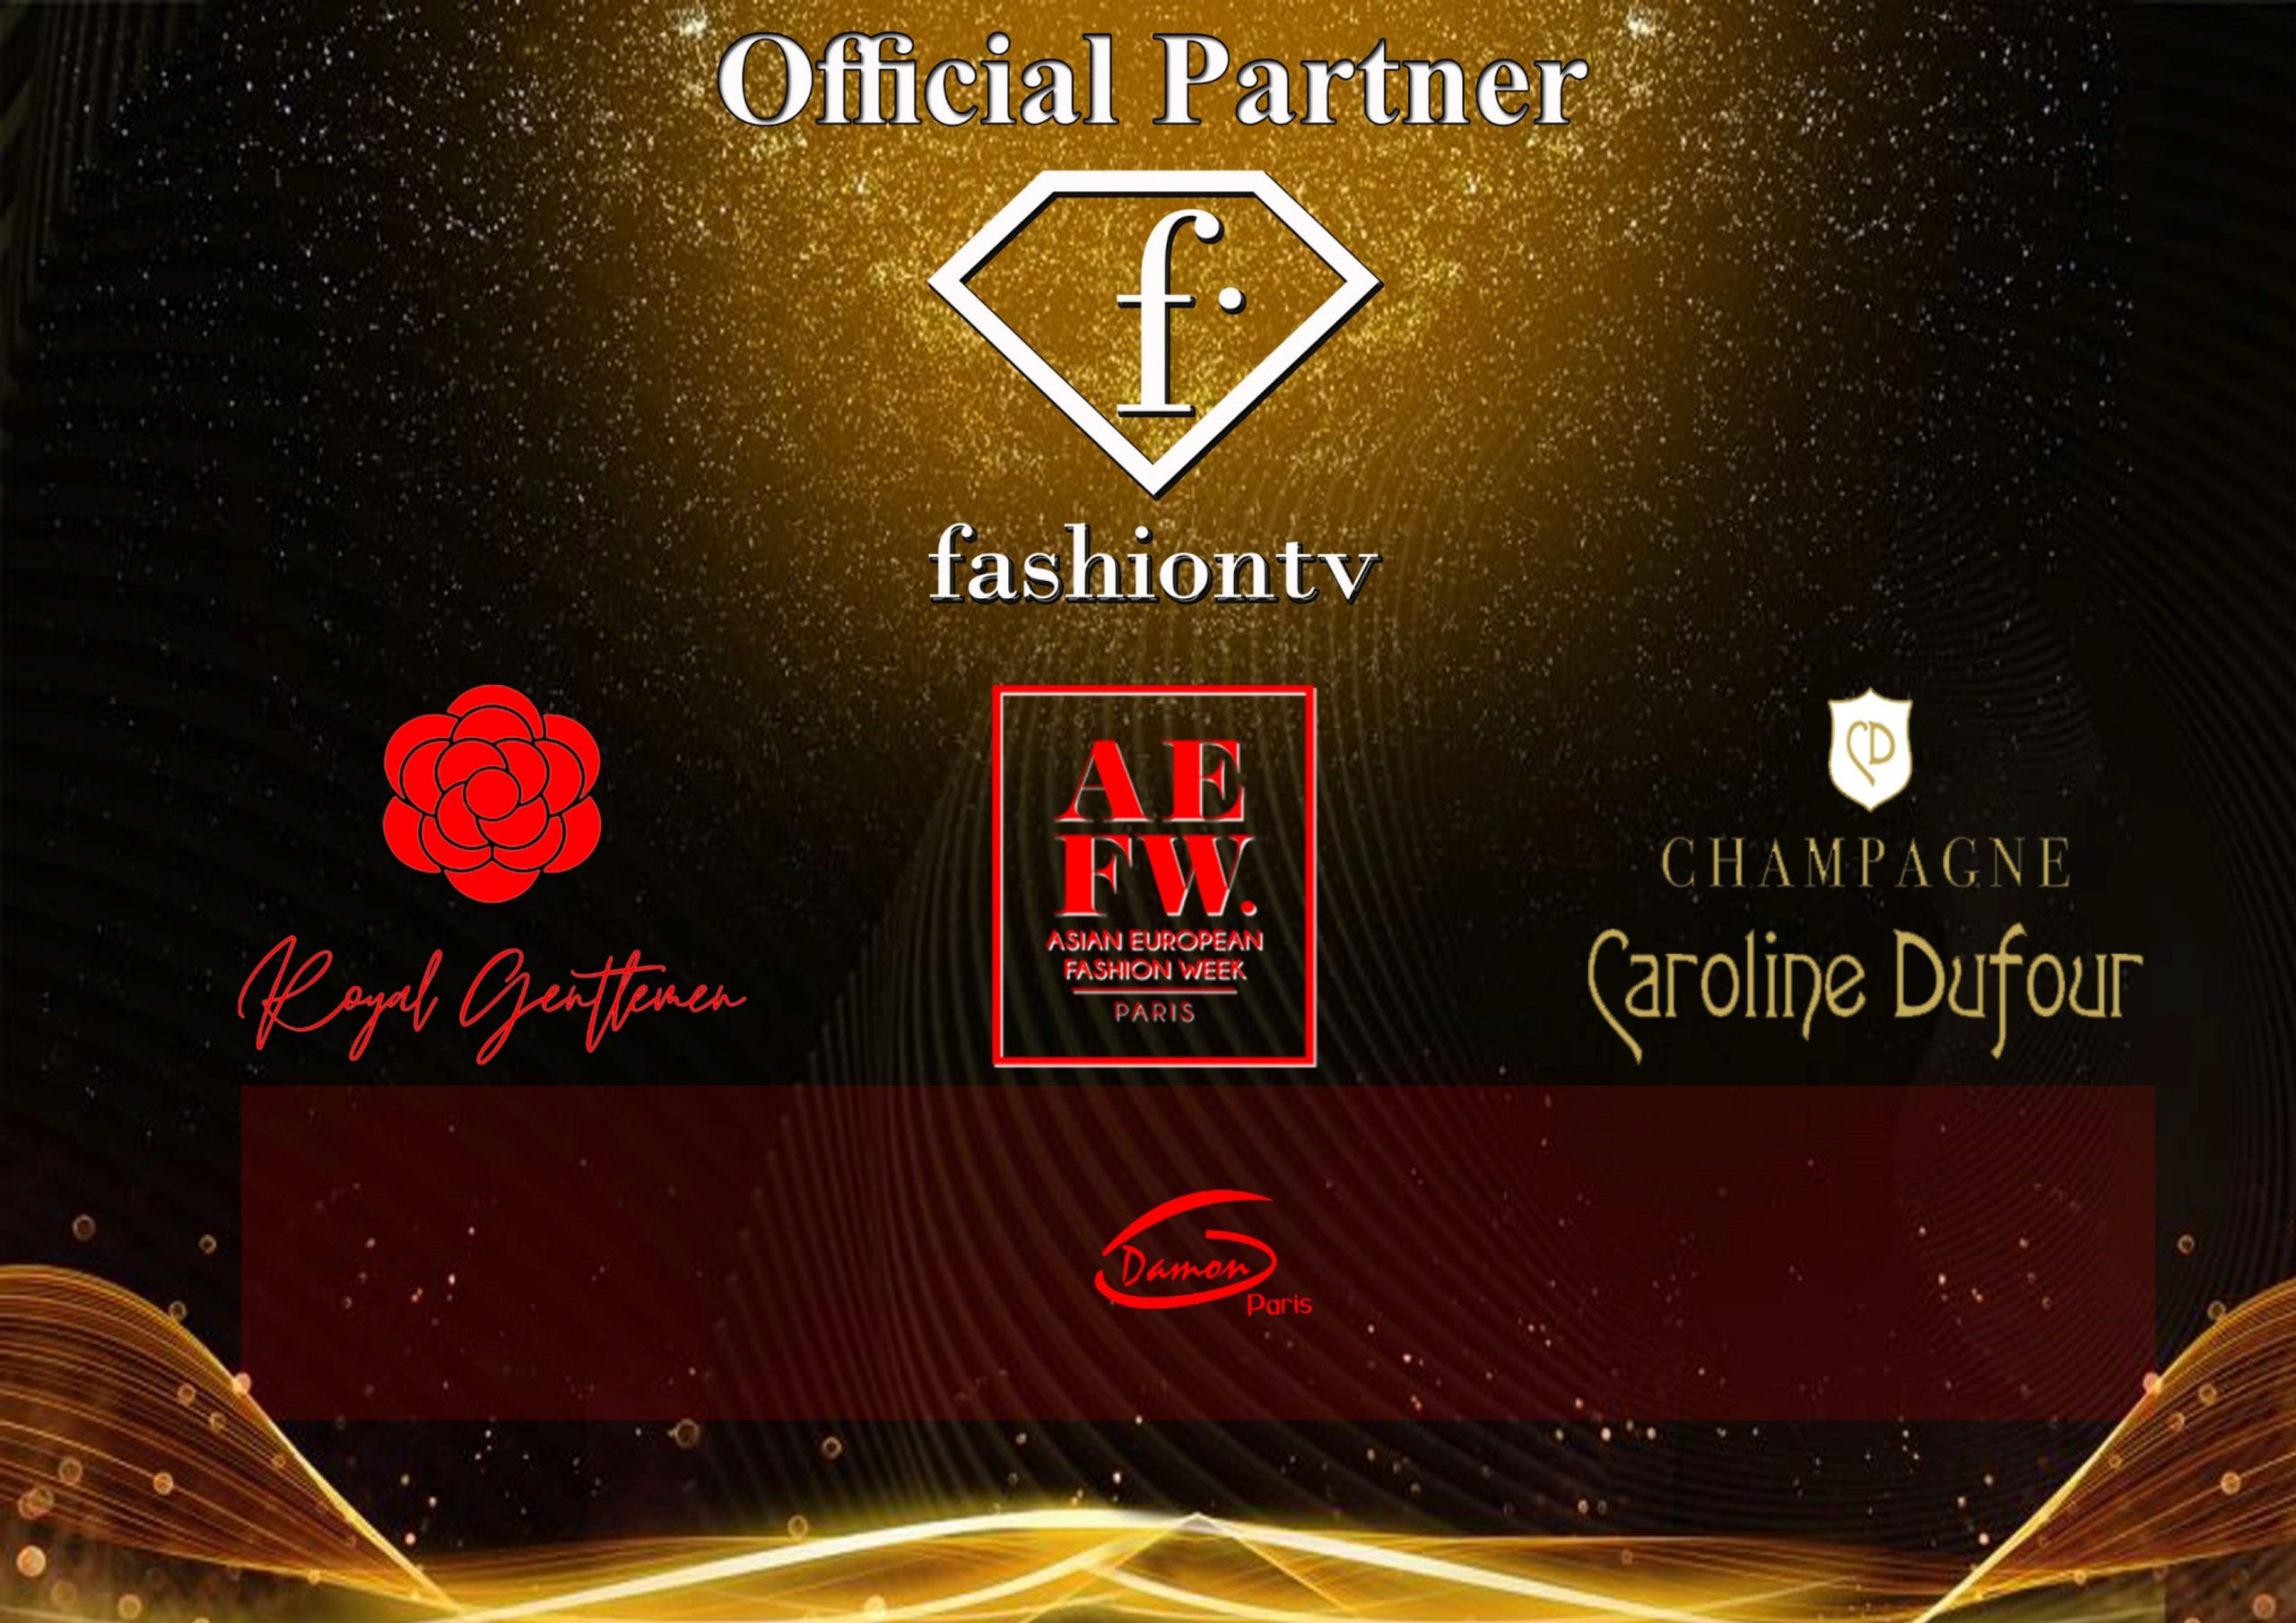 AFRICA-VOGUE-COVER-Designers-Call-AEFW-presents-fashiontv-OFFICIAL-FASHION-PARTY-SHOW-IN-CANNES-76TH-Edition-of-CANNES-FESTIVAL-Official-Partner-fashiontv-DN-AFRICA-DN-A-INTERNATIONAL-Media-Partner